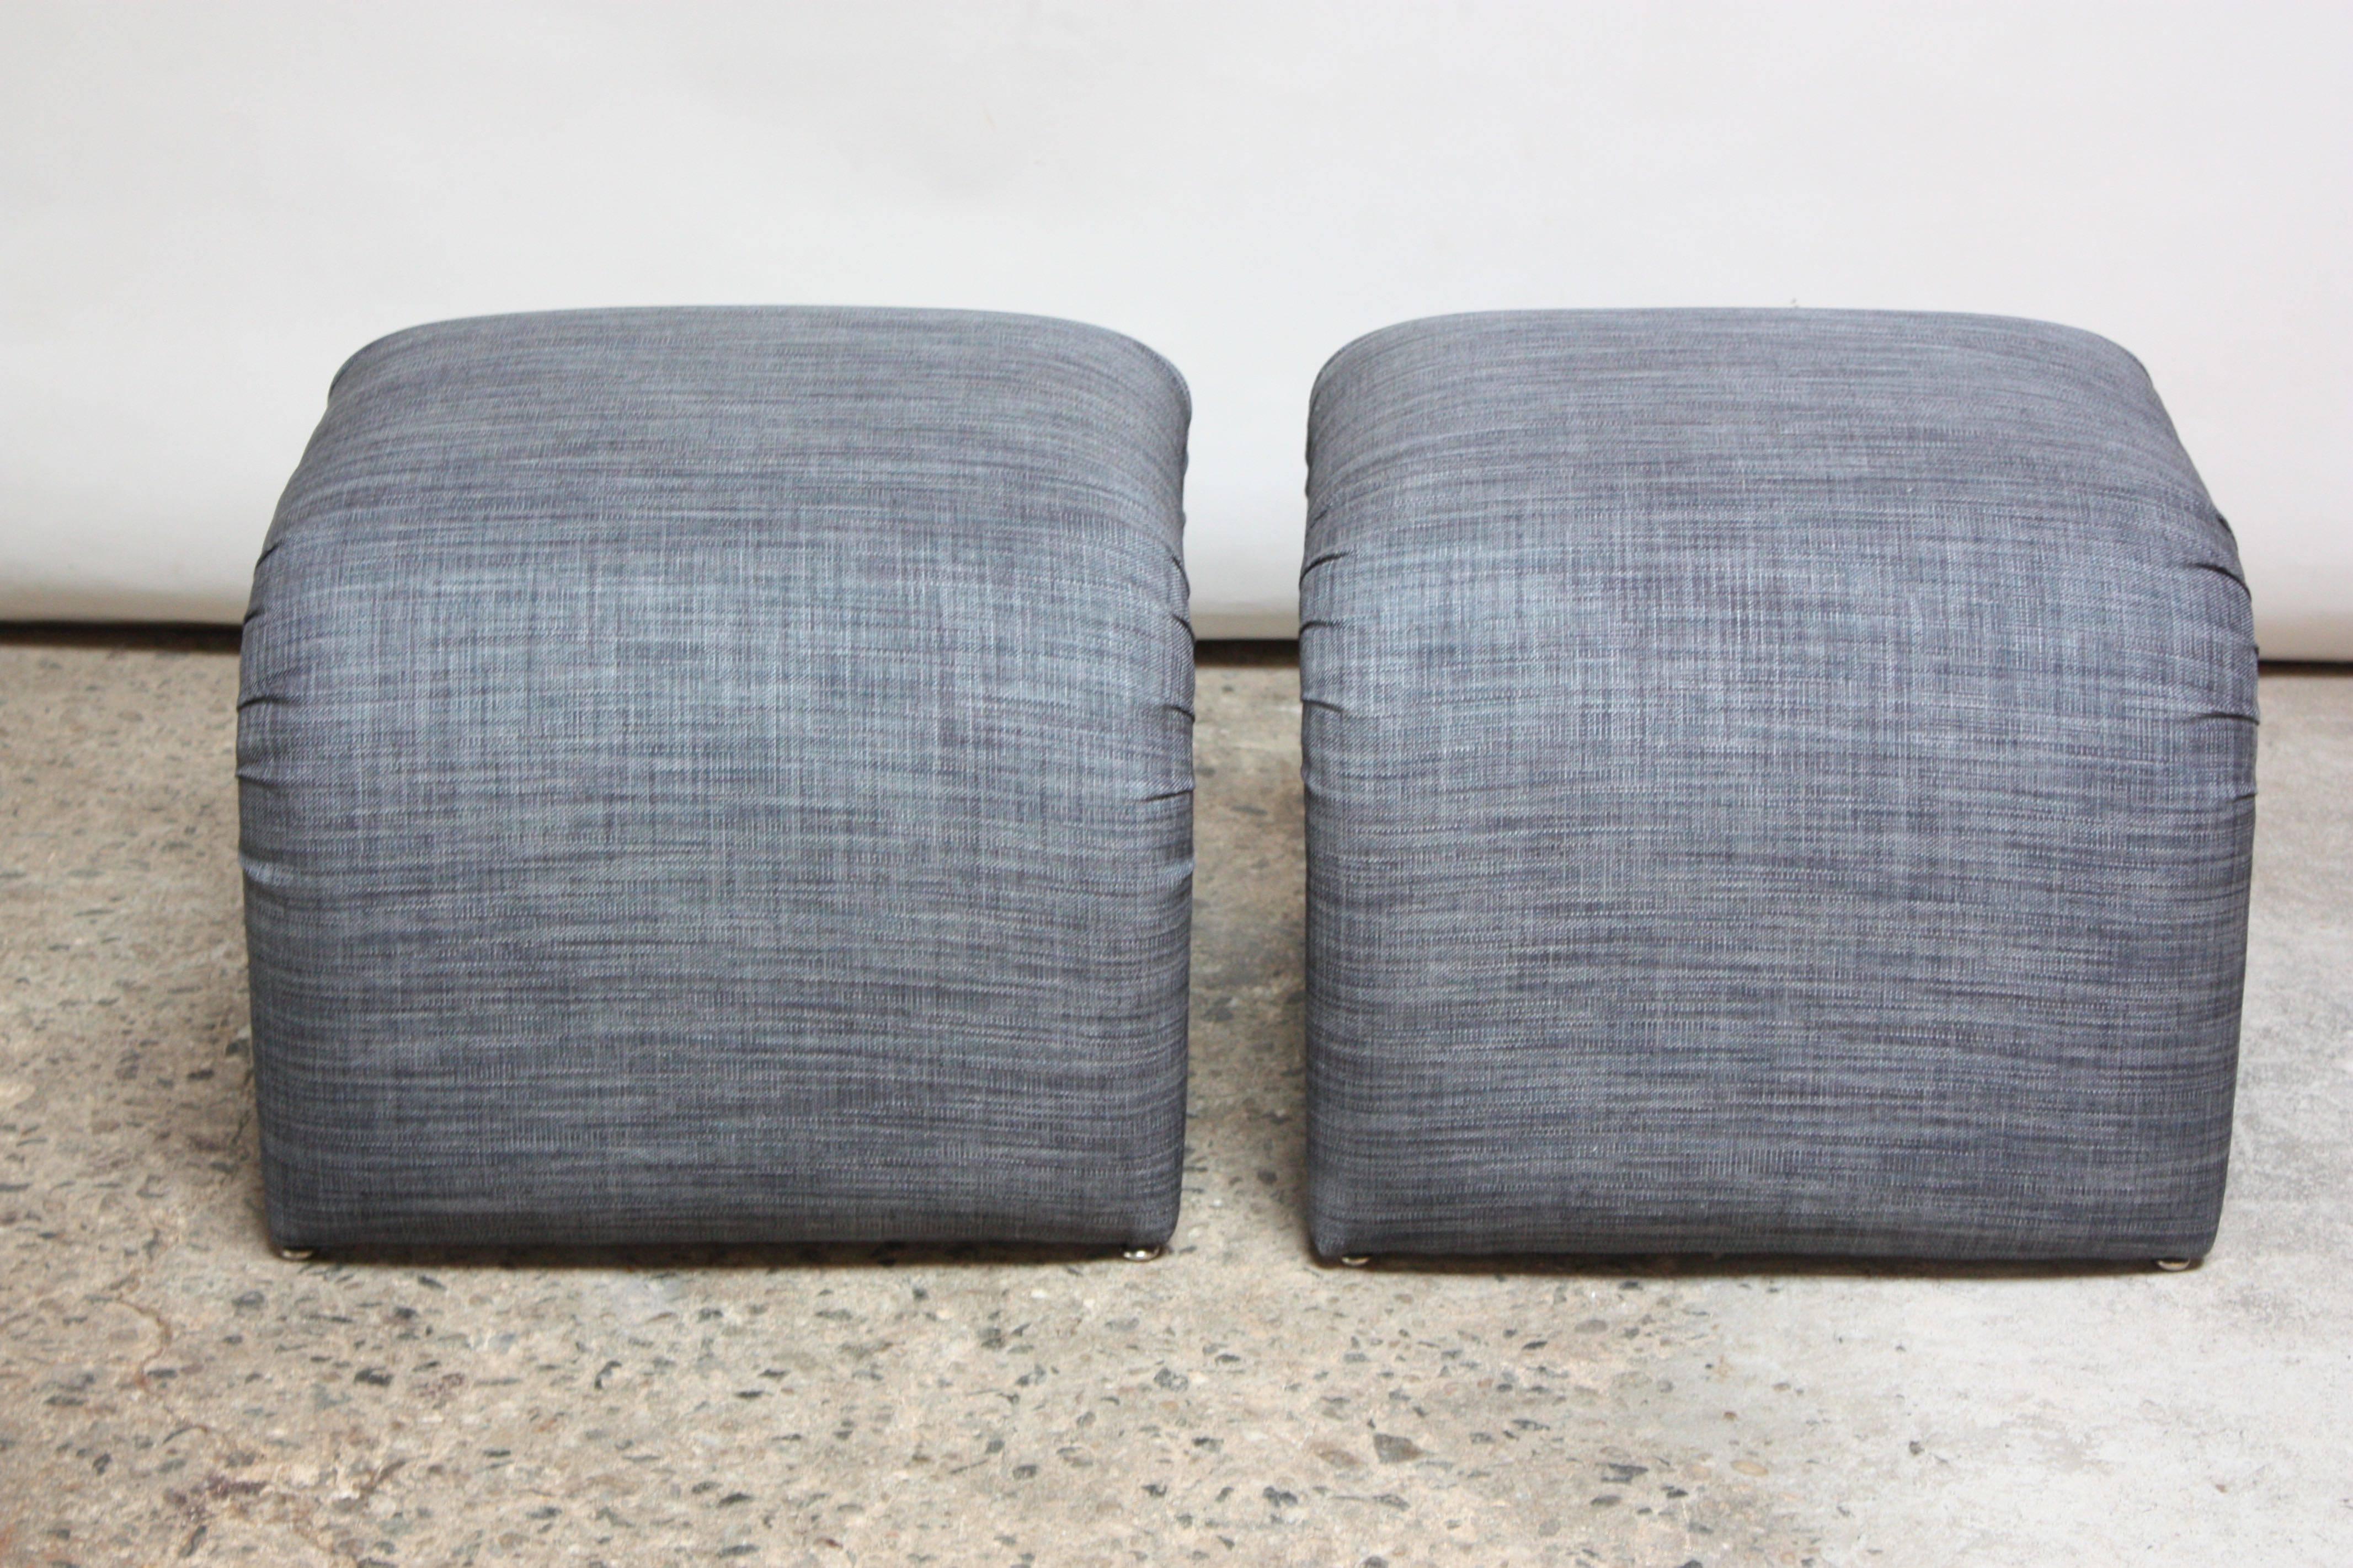 Late 20th Century Pair of Midcentury Fiberglass 'Waterfall' Benches or Ottomans